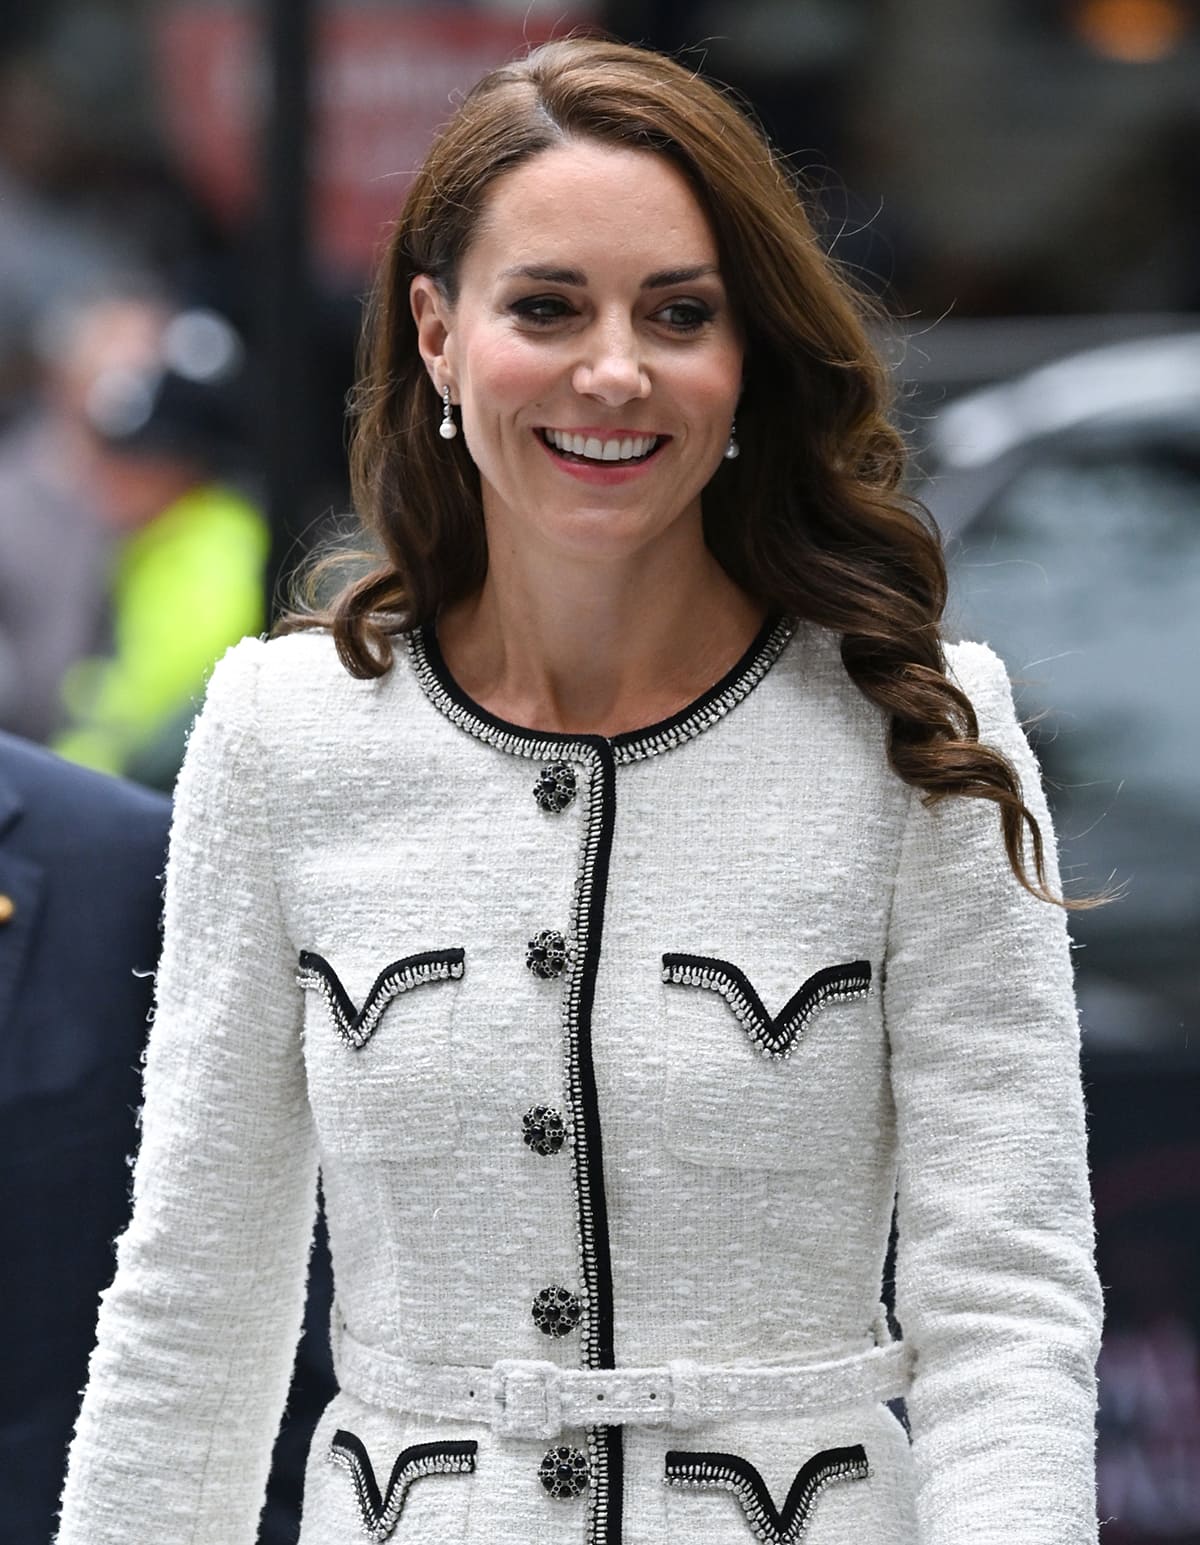 Kate Middleton wears side-parted curls with peachy blush and pink lip color